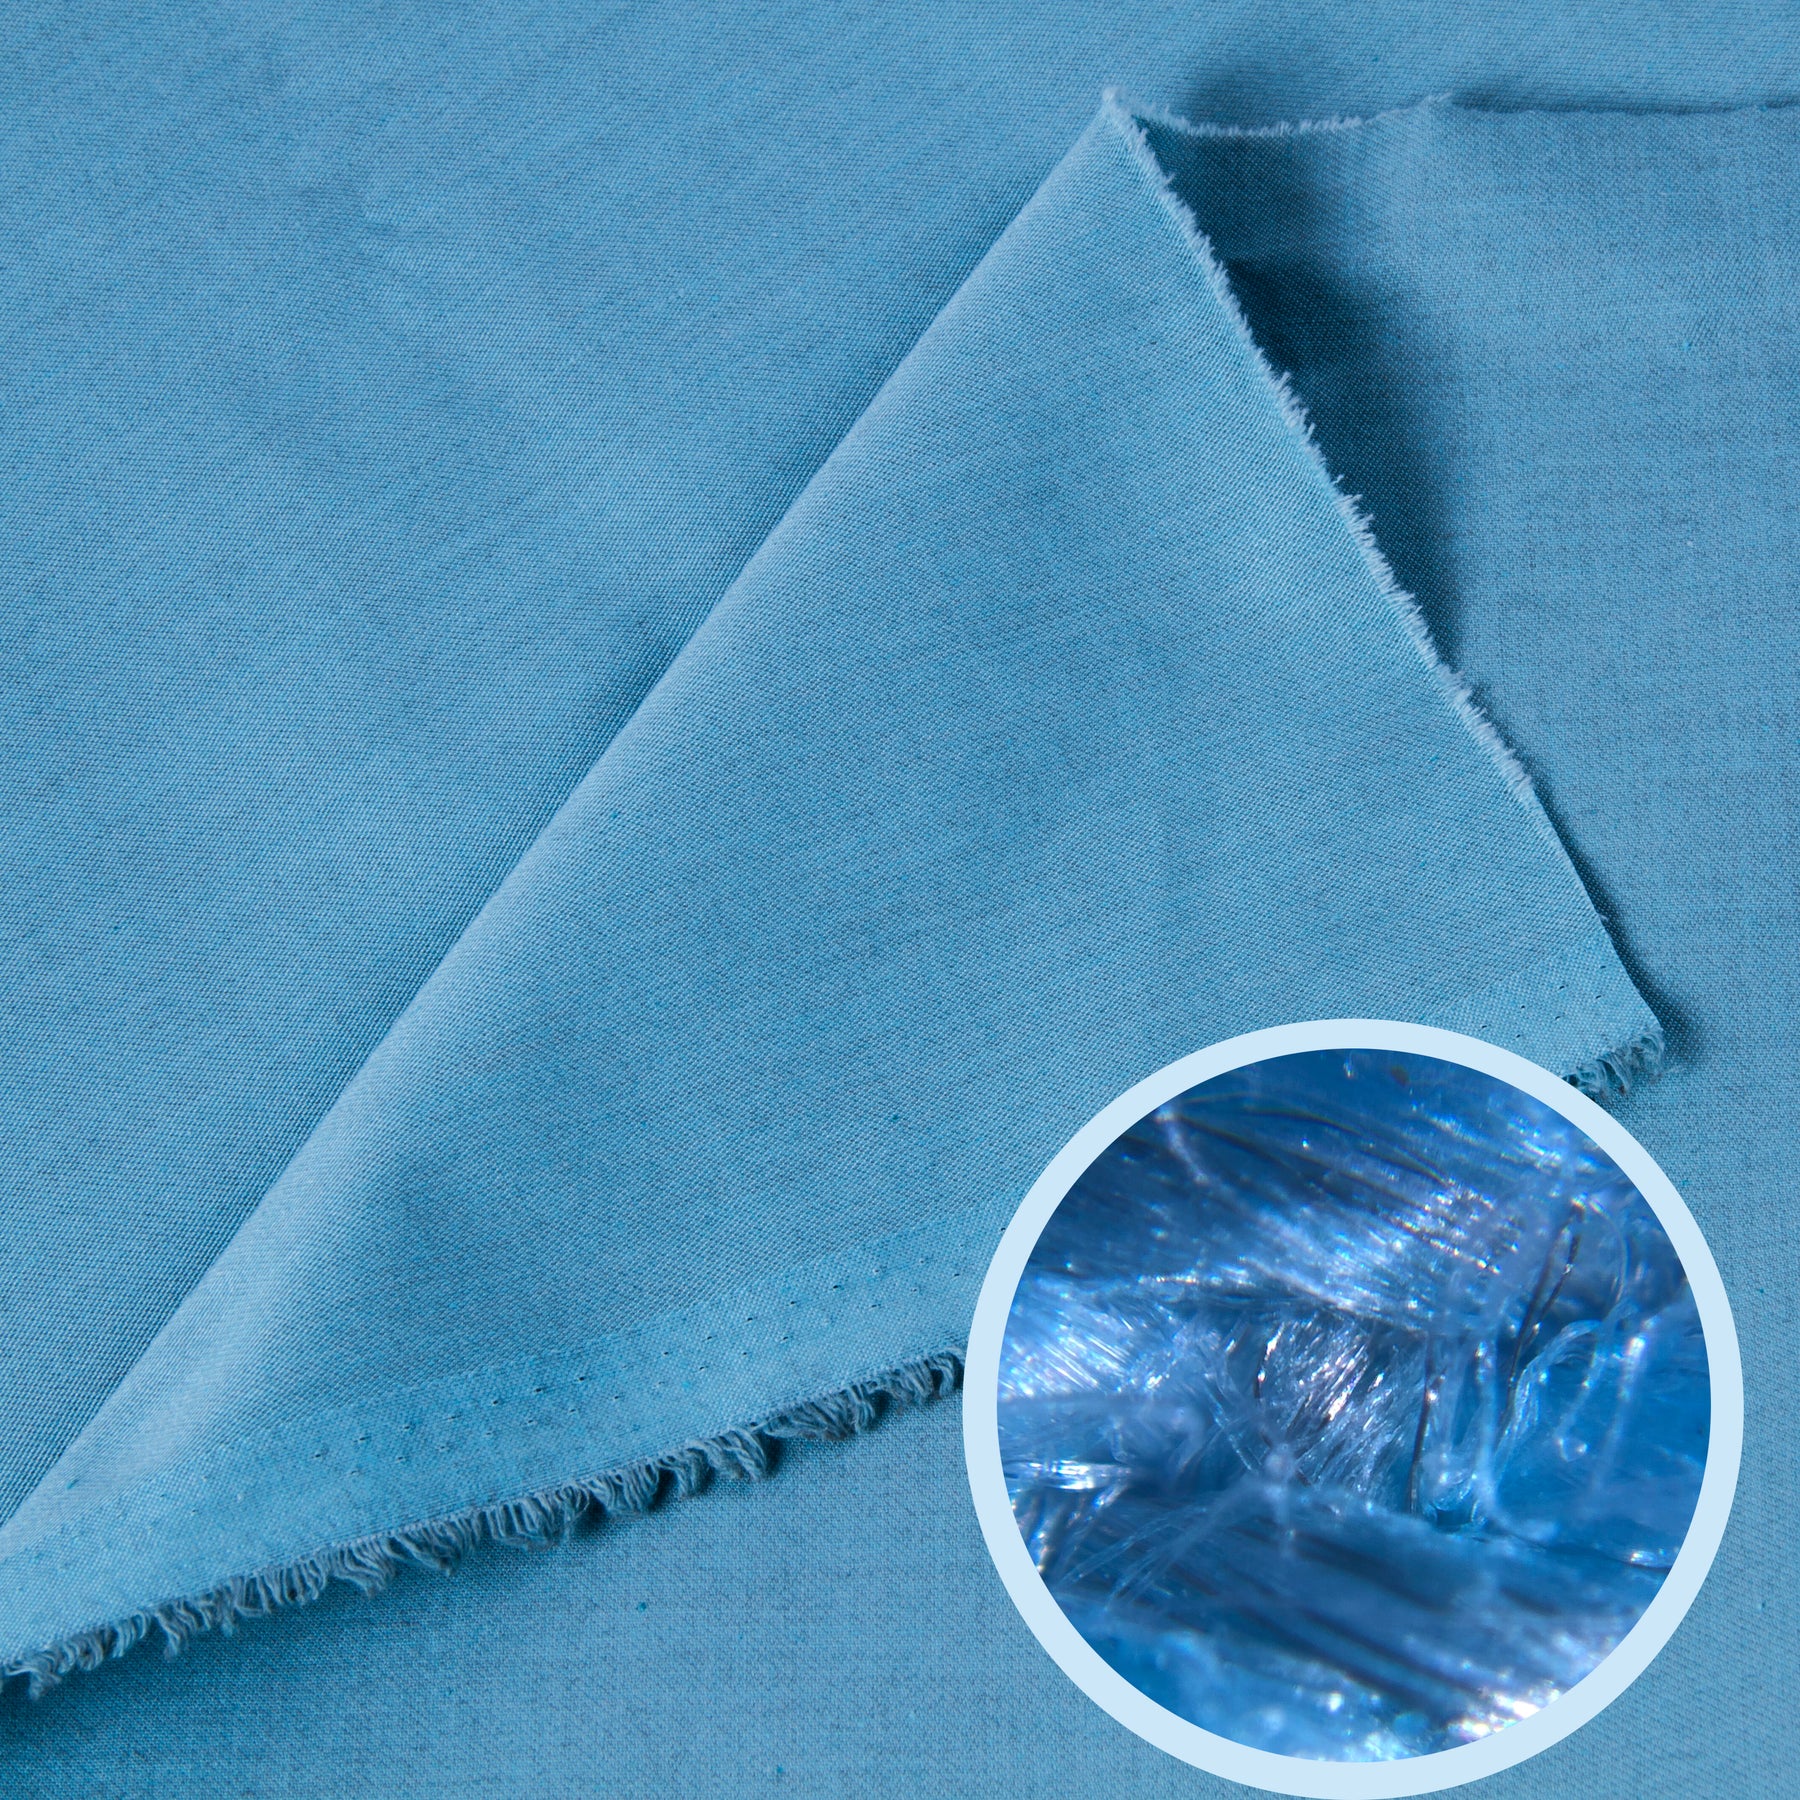 Stainless Steel Fabric in light blue color